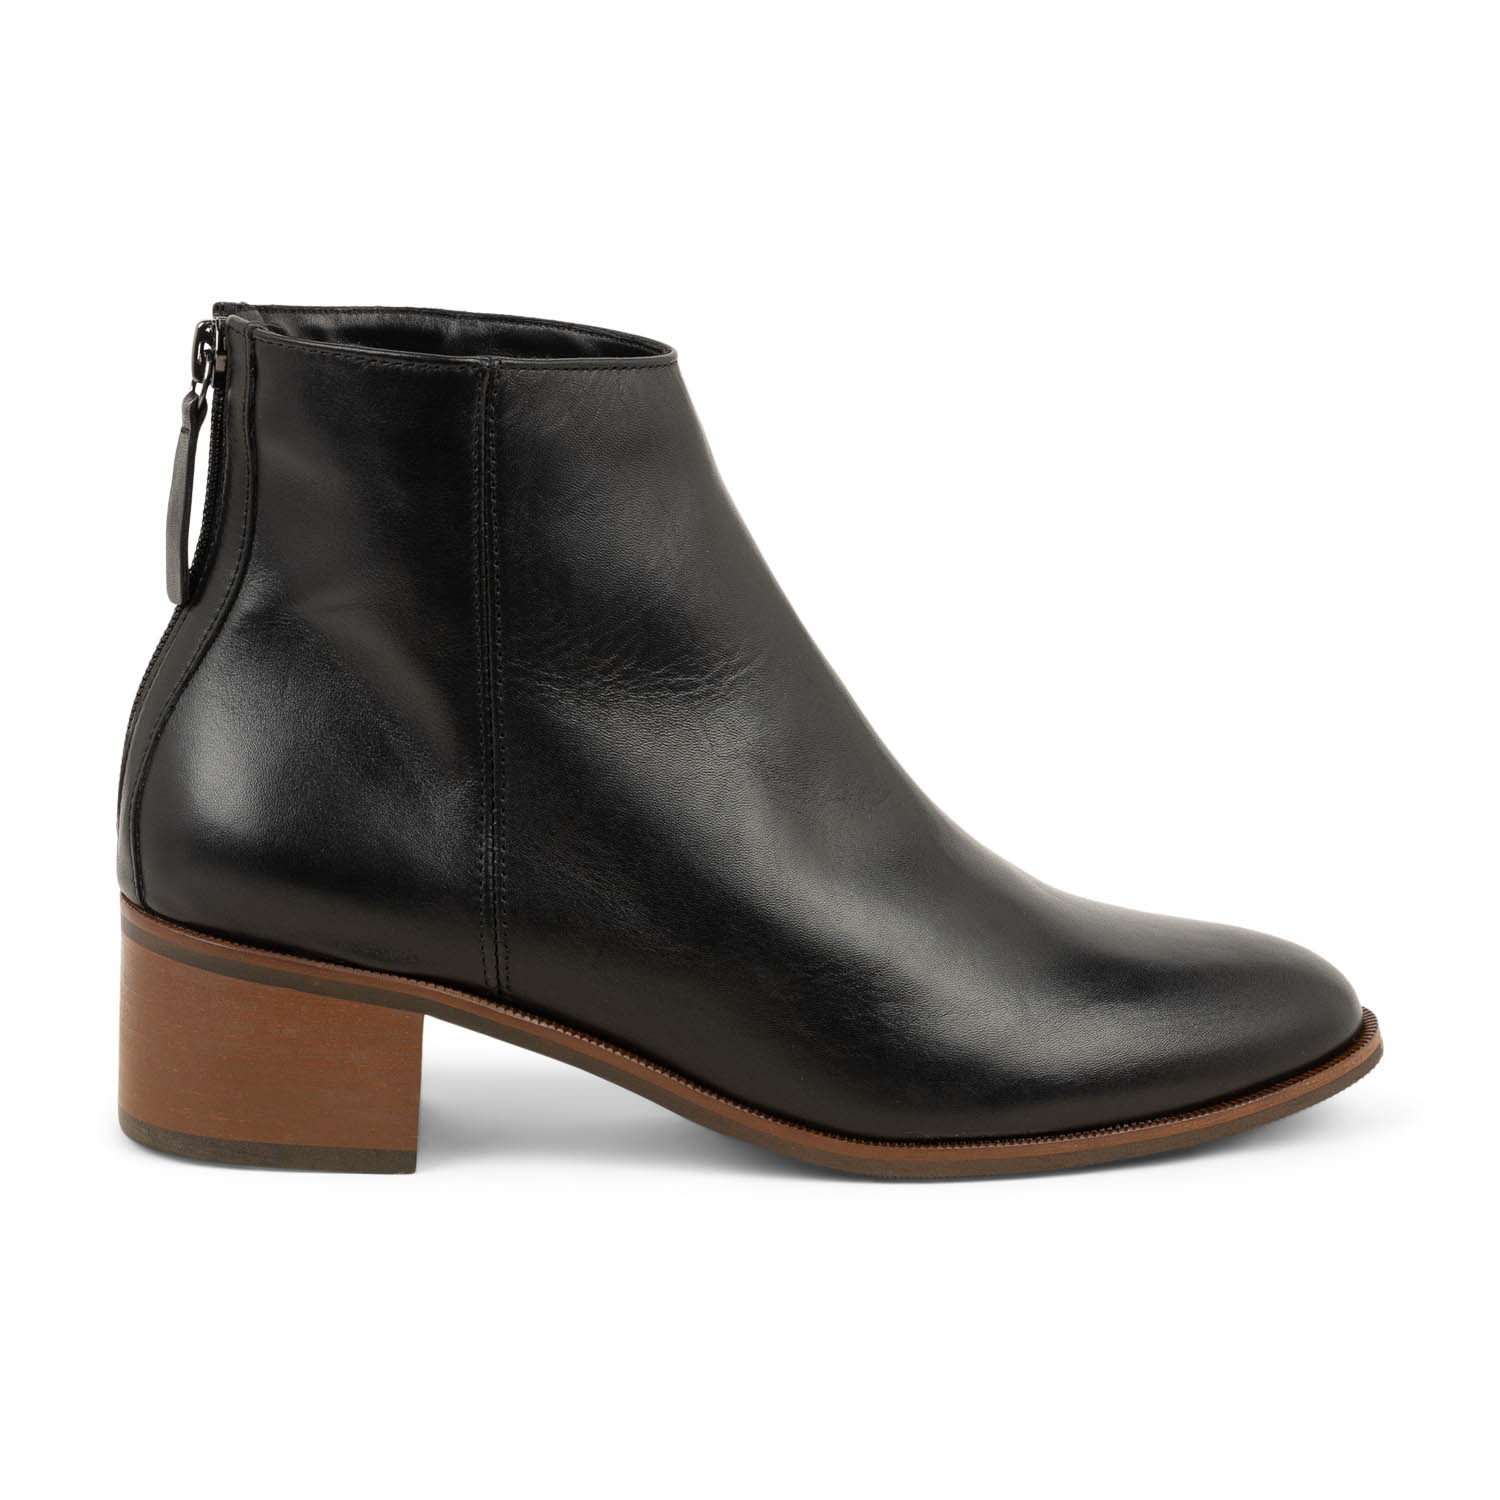 01 - MARIAME -  - Boots et bottines - Cuir